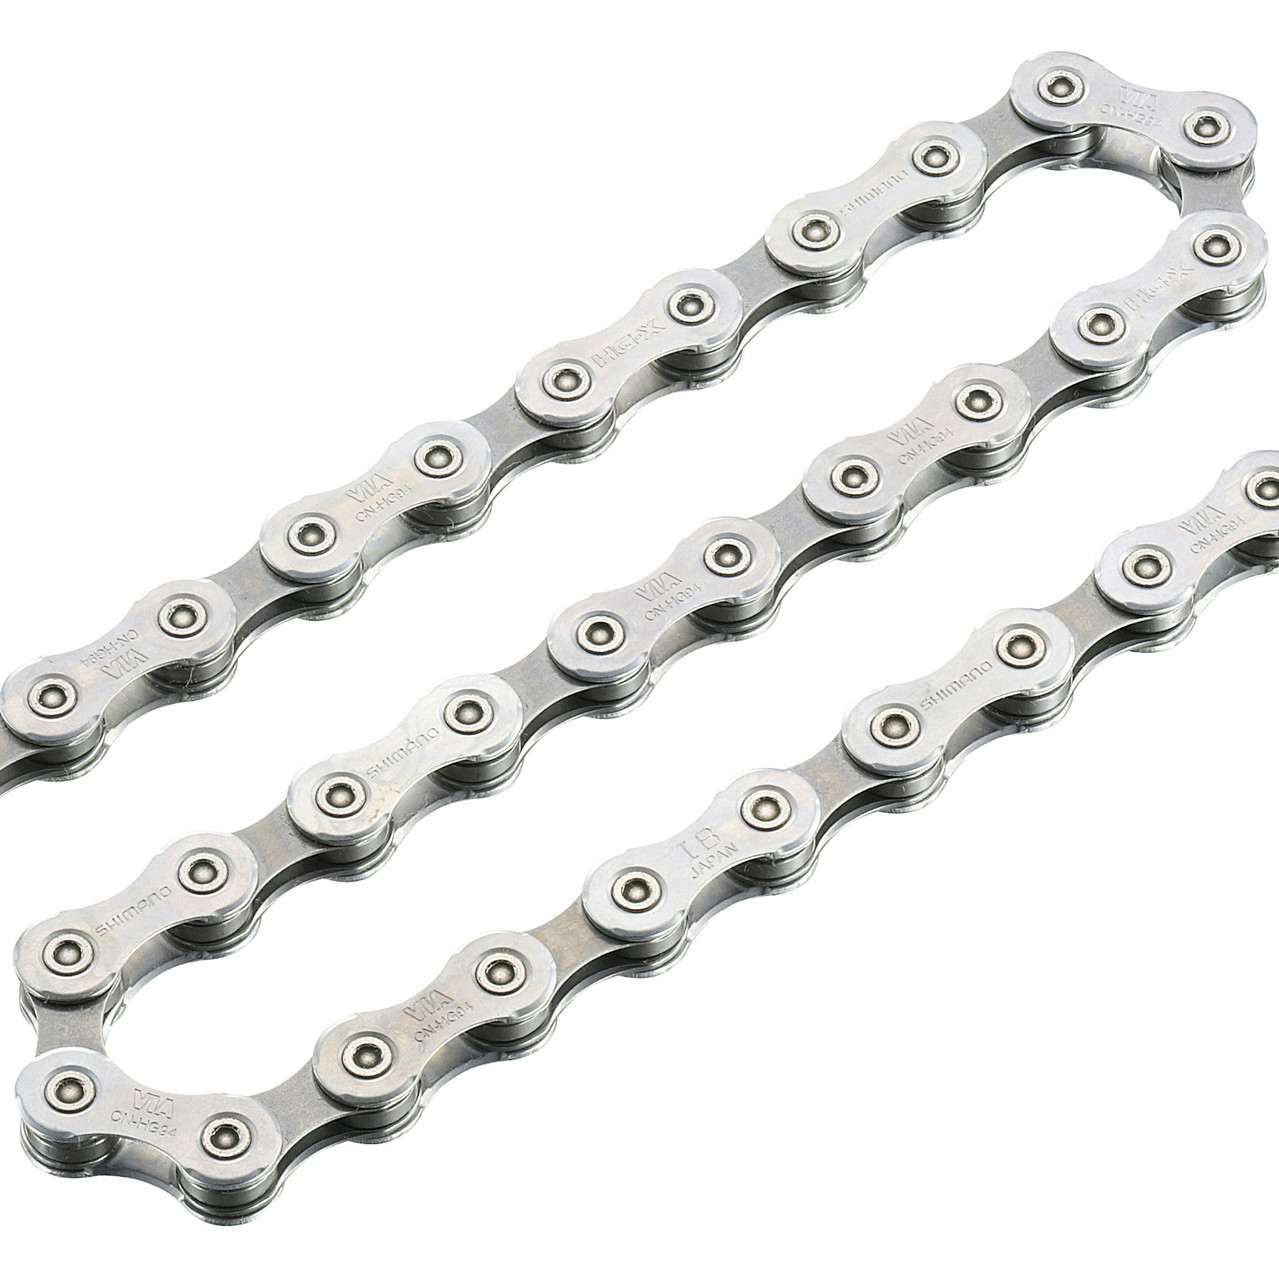 CN-HG93 9 Speed Bicycle Chain NO_COLOUR